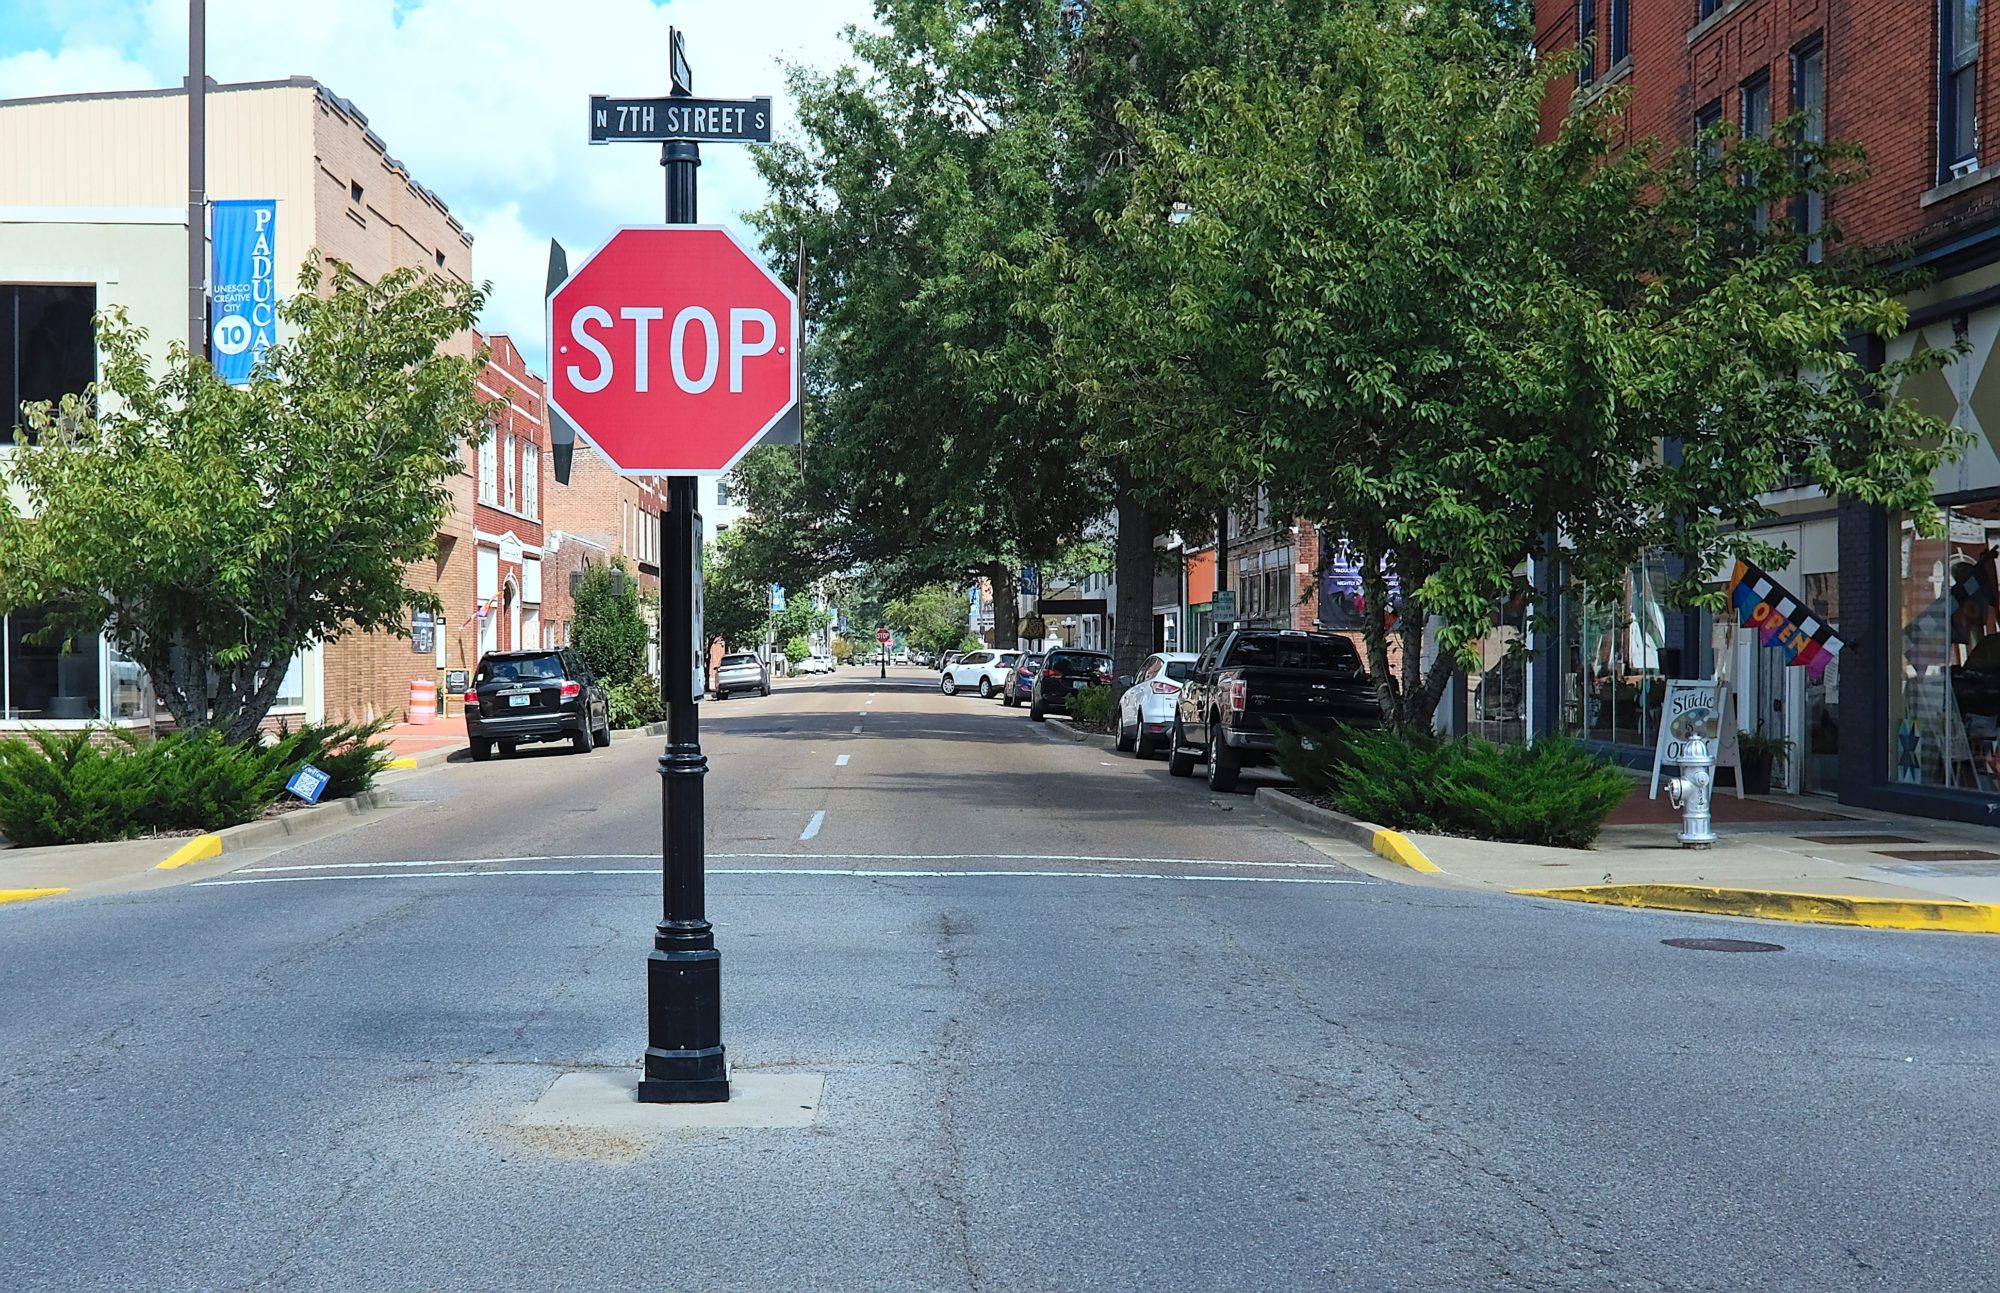 A shot of downtown Paducah with a stop sign in the foreground